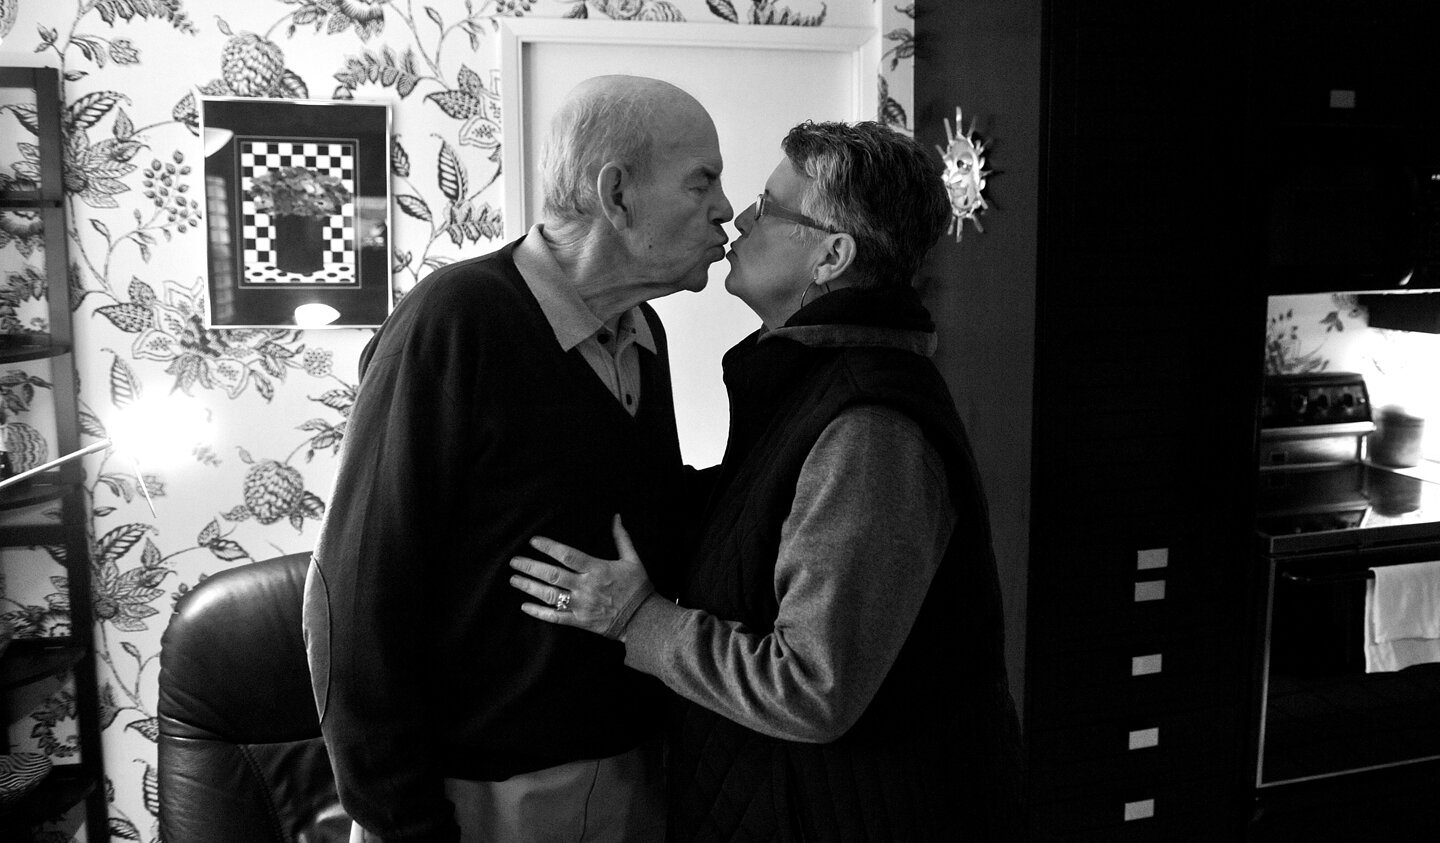  Washington State Representative Kelli Linville, right, kisses her father Martin Kuljis on Tuesday, Dec. 7, 2010, at her childhood home in Fairhaven. After 17 years in office, Linville lost to Vincent Buys by just 149 votes in this year's election. 